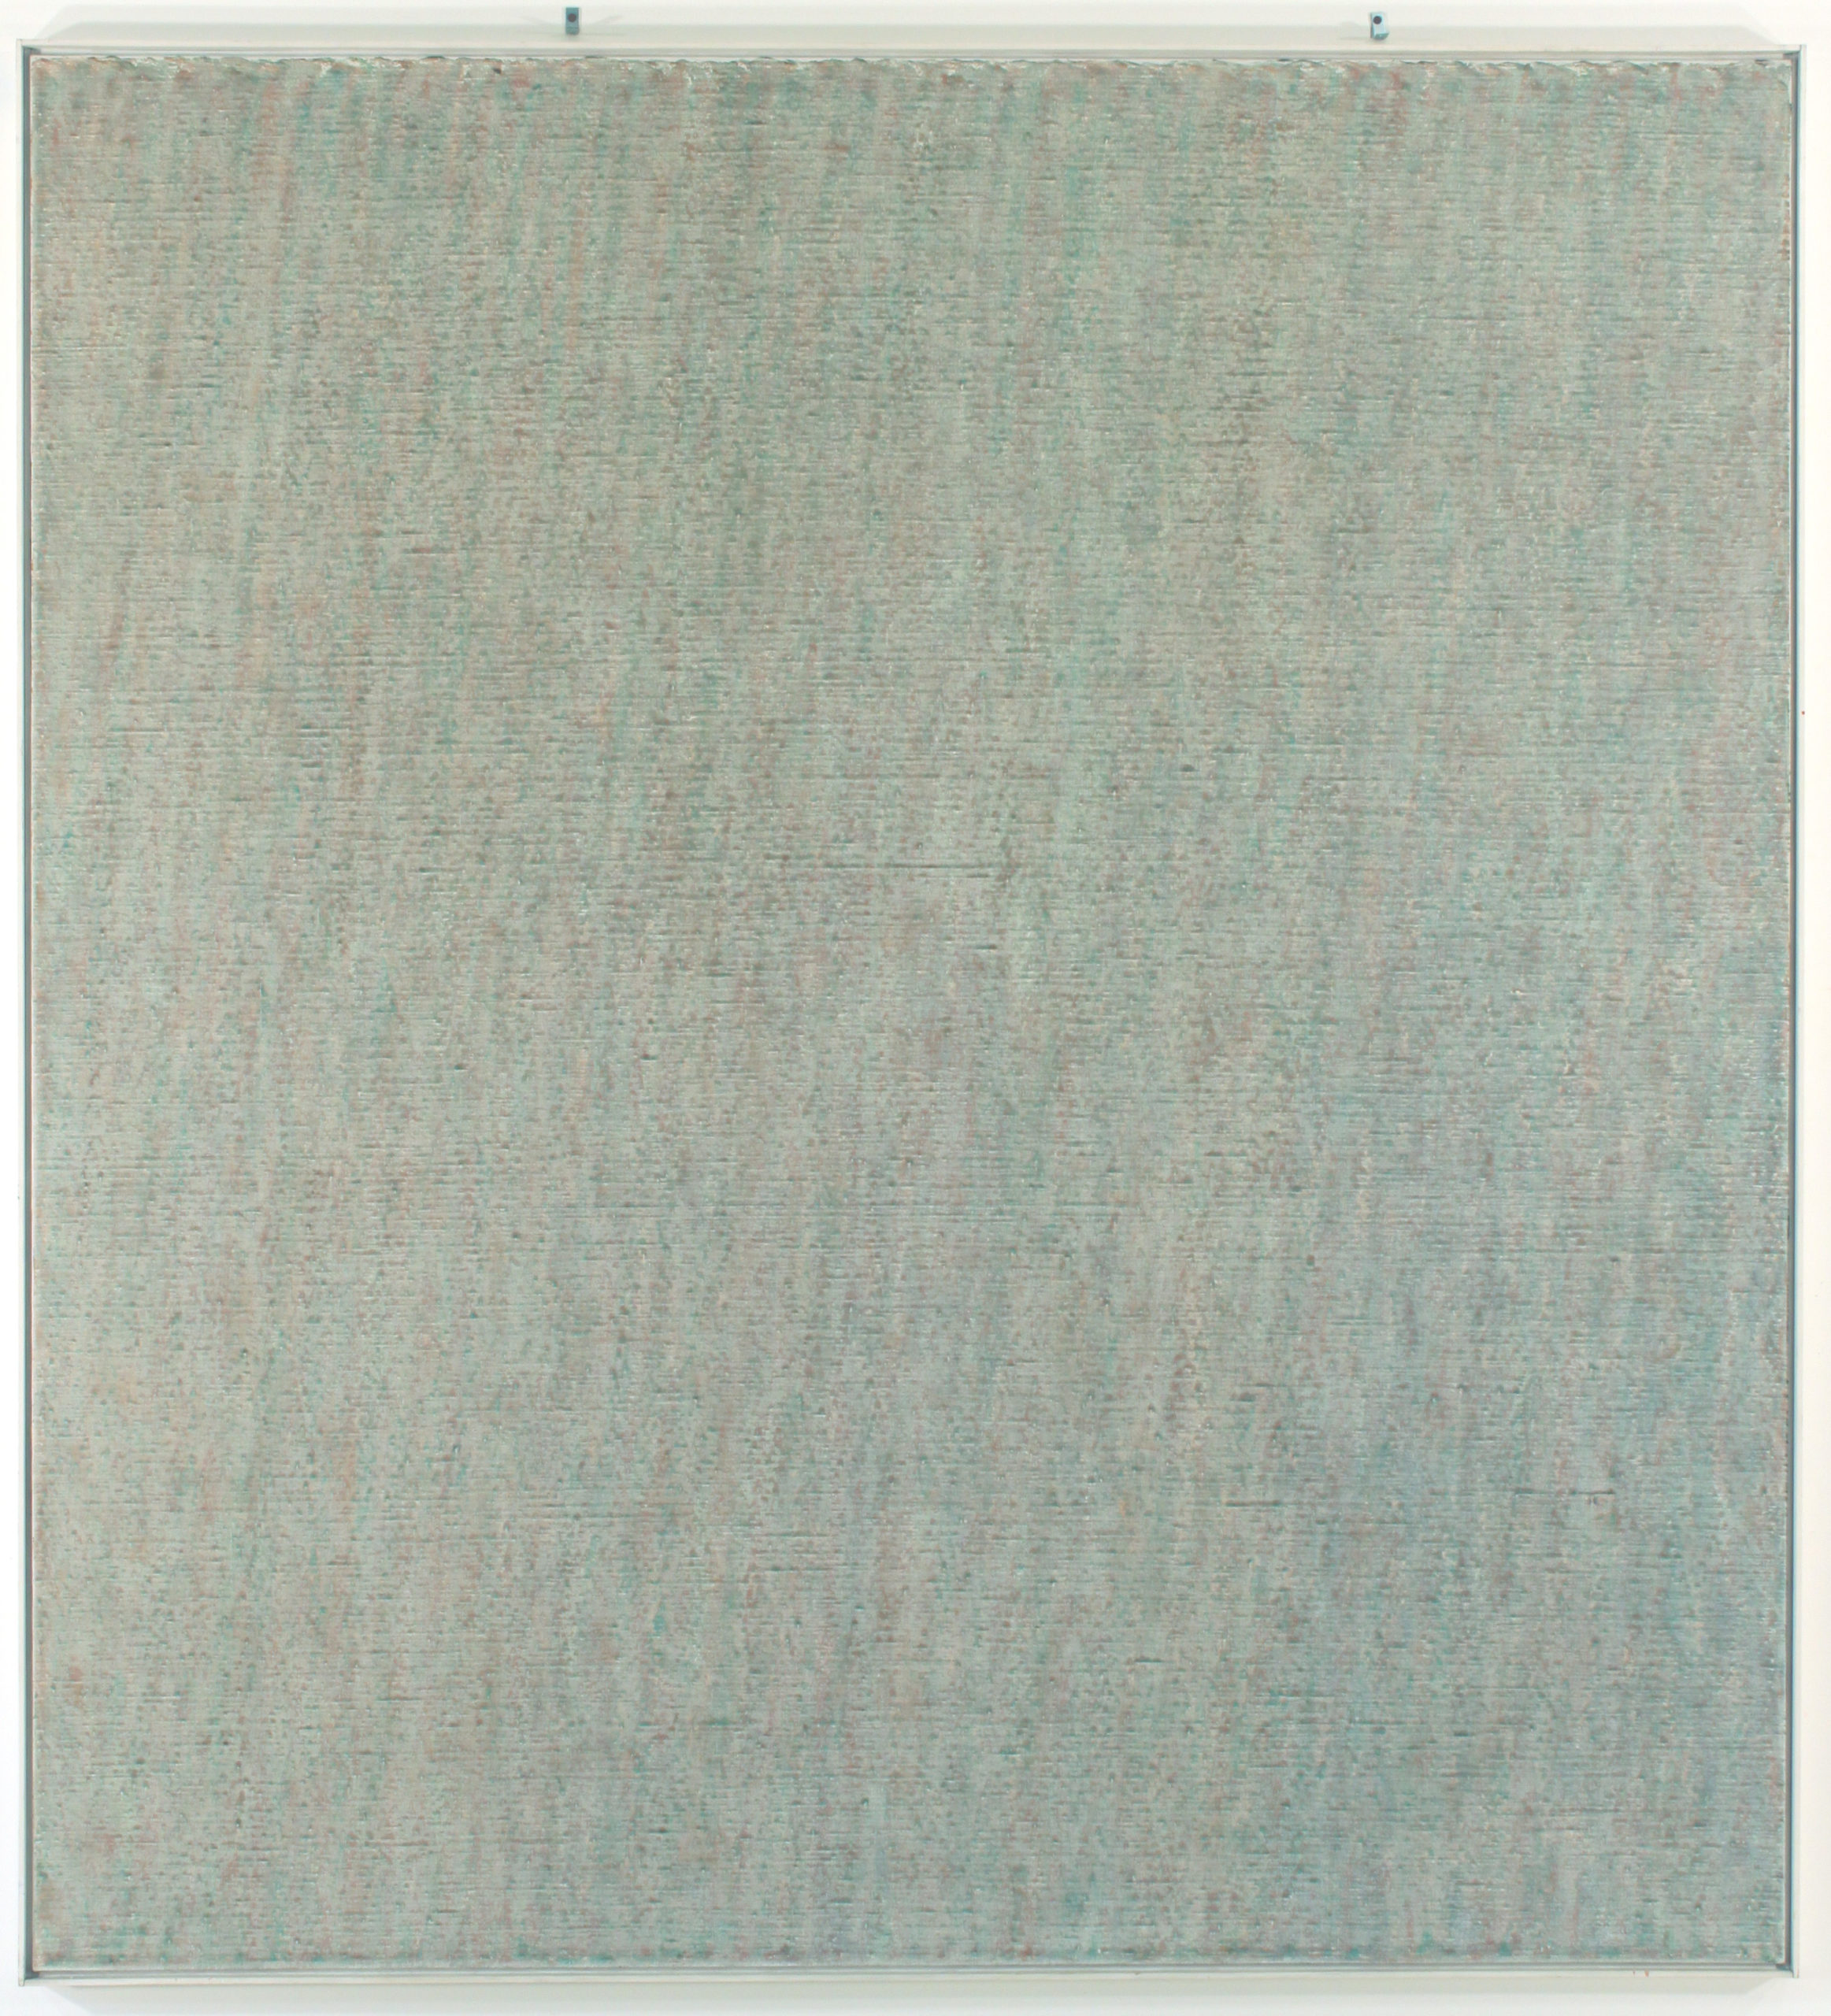 Anders Knutsson: #16, 1975.